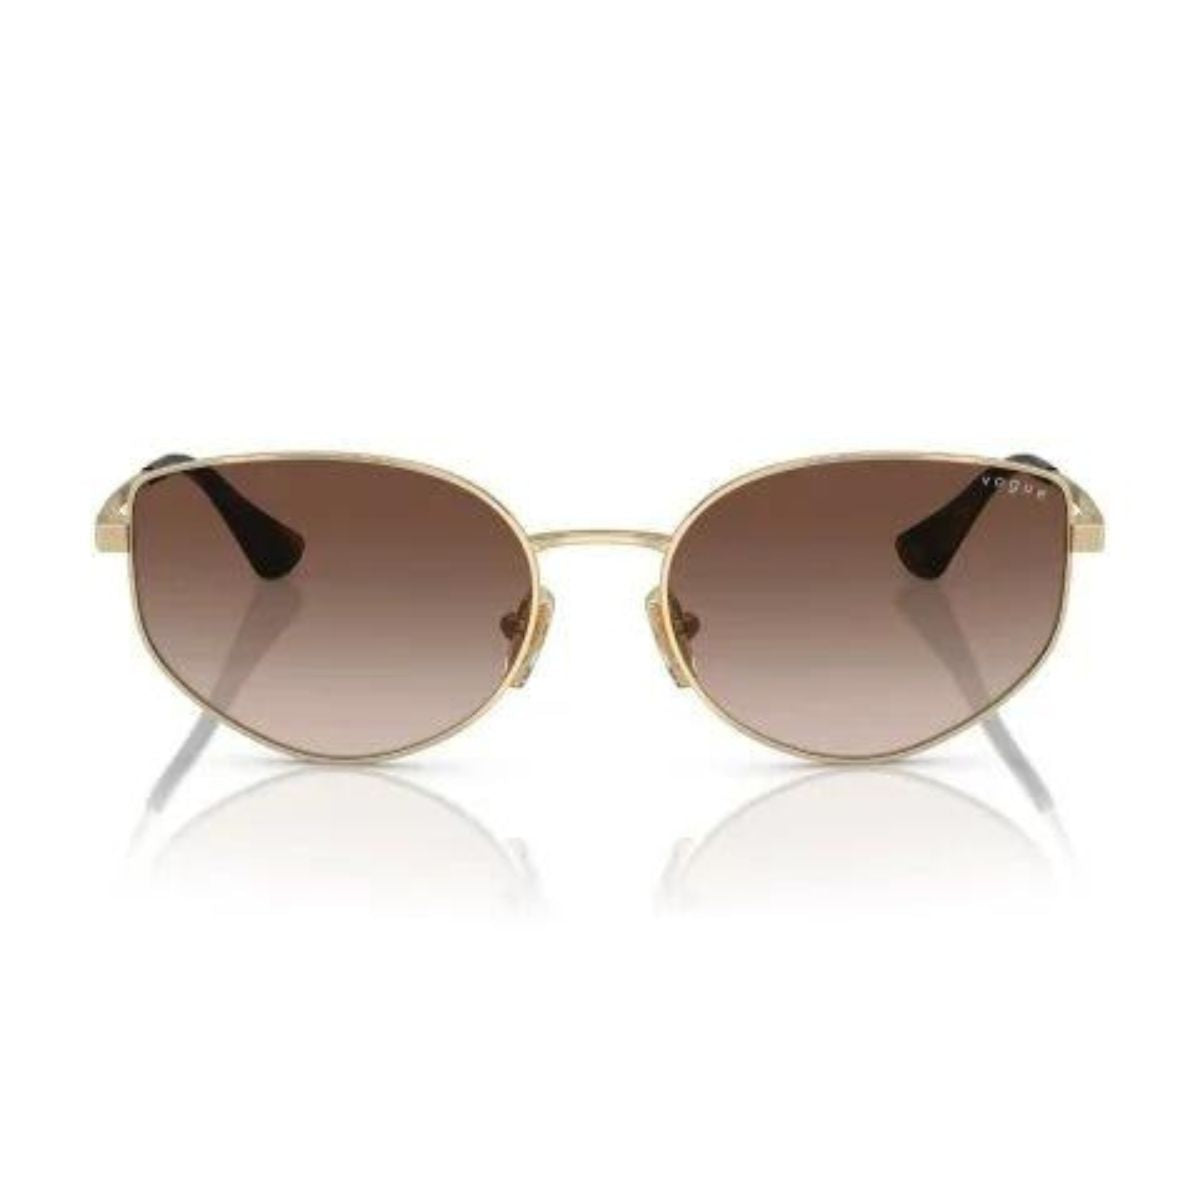 "Vogue Stylish gold metal sunglasses for womens at optorium"